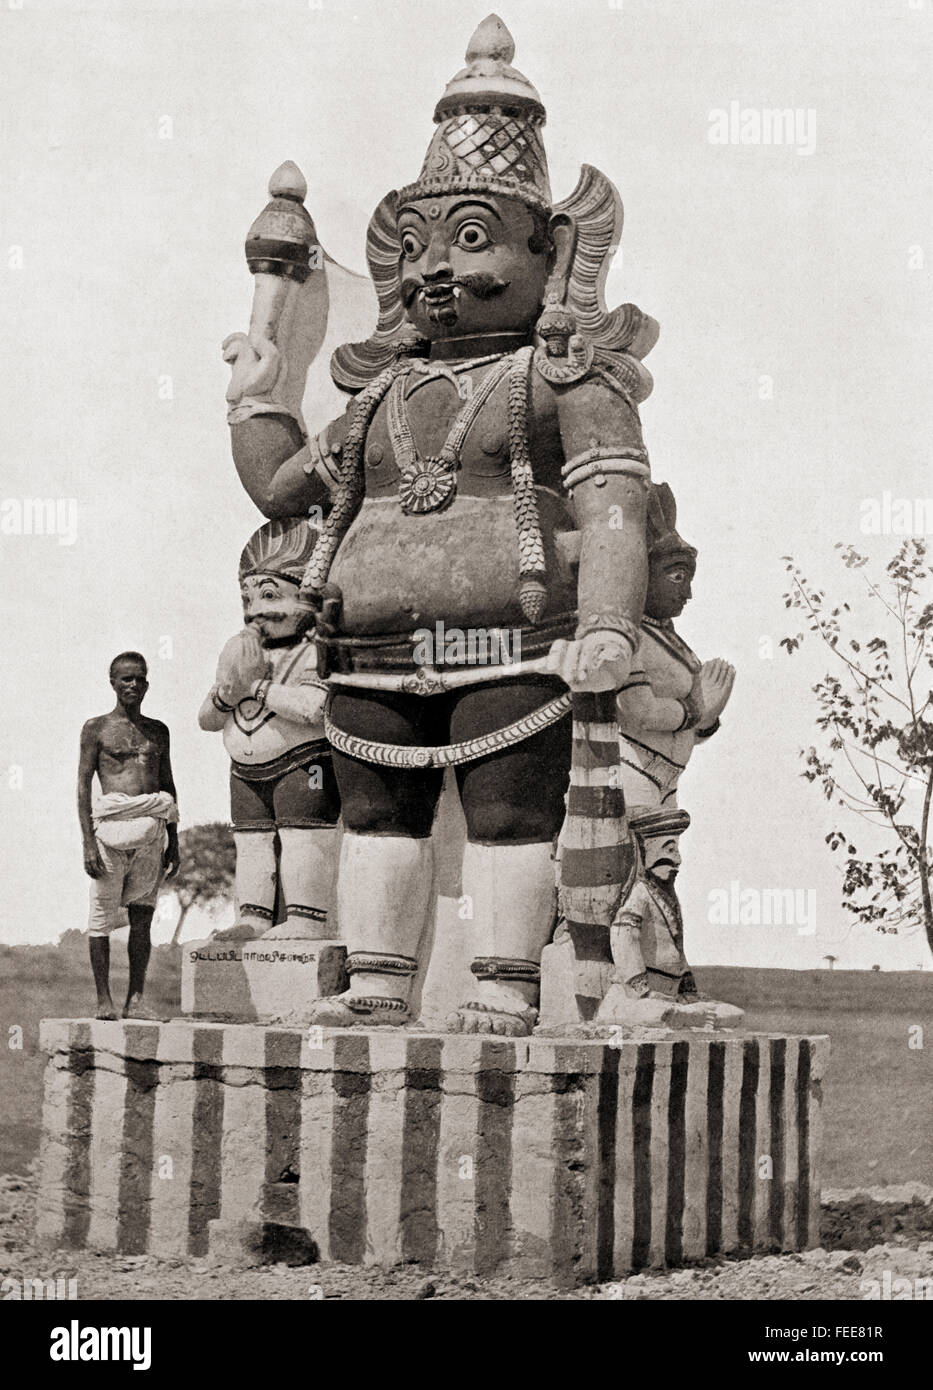 A village deity. A colossal statue of the gate-keeper god or Dvarapala,holding a gadha mace and with his attendants, in Tamilakam or the Ancient Tamil country, southern India. Stock Photo